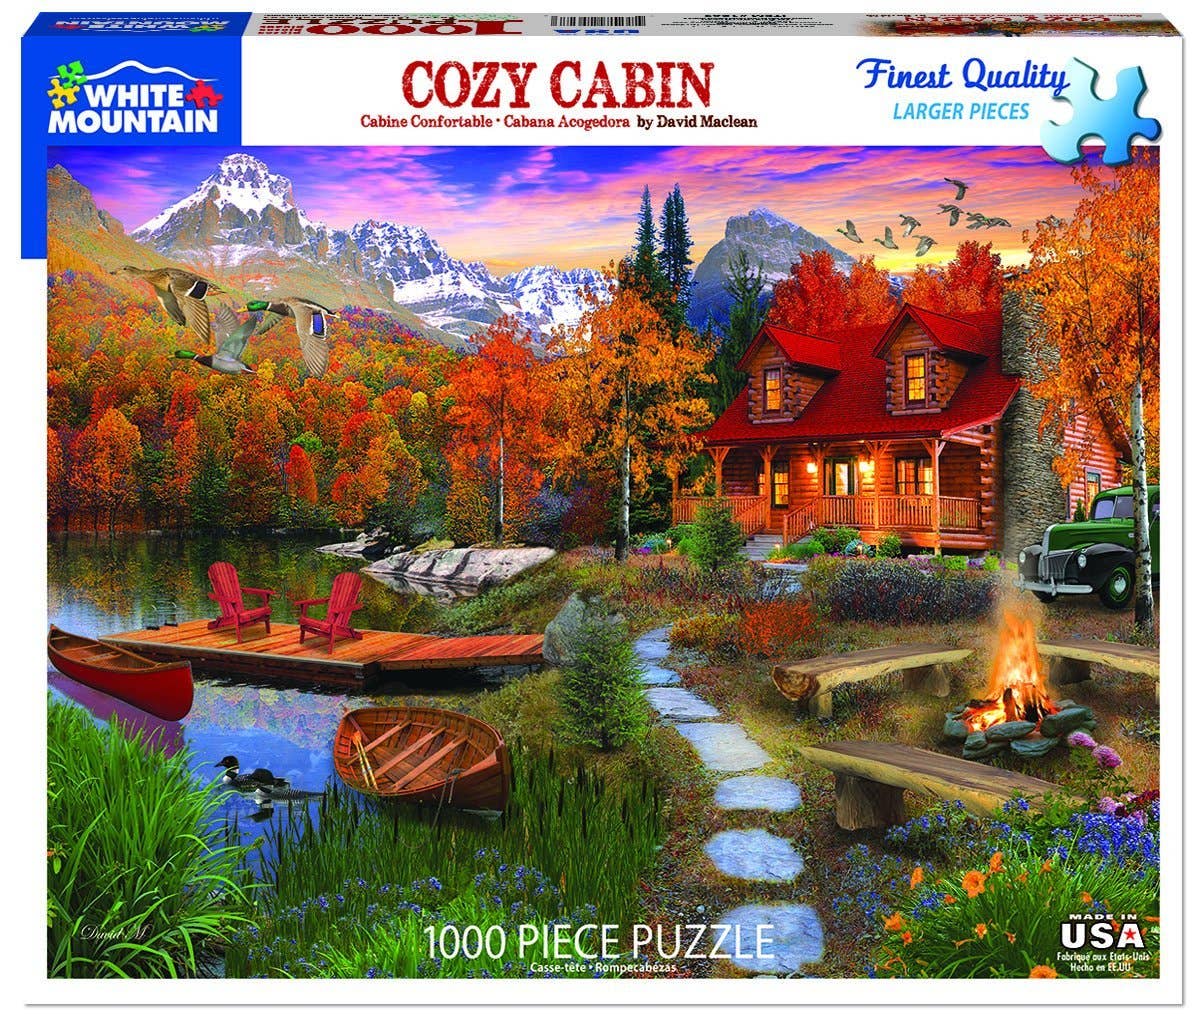 Cozy Cabin - 1000 piece Puzzle by White Mountain Puzzles